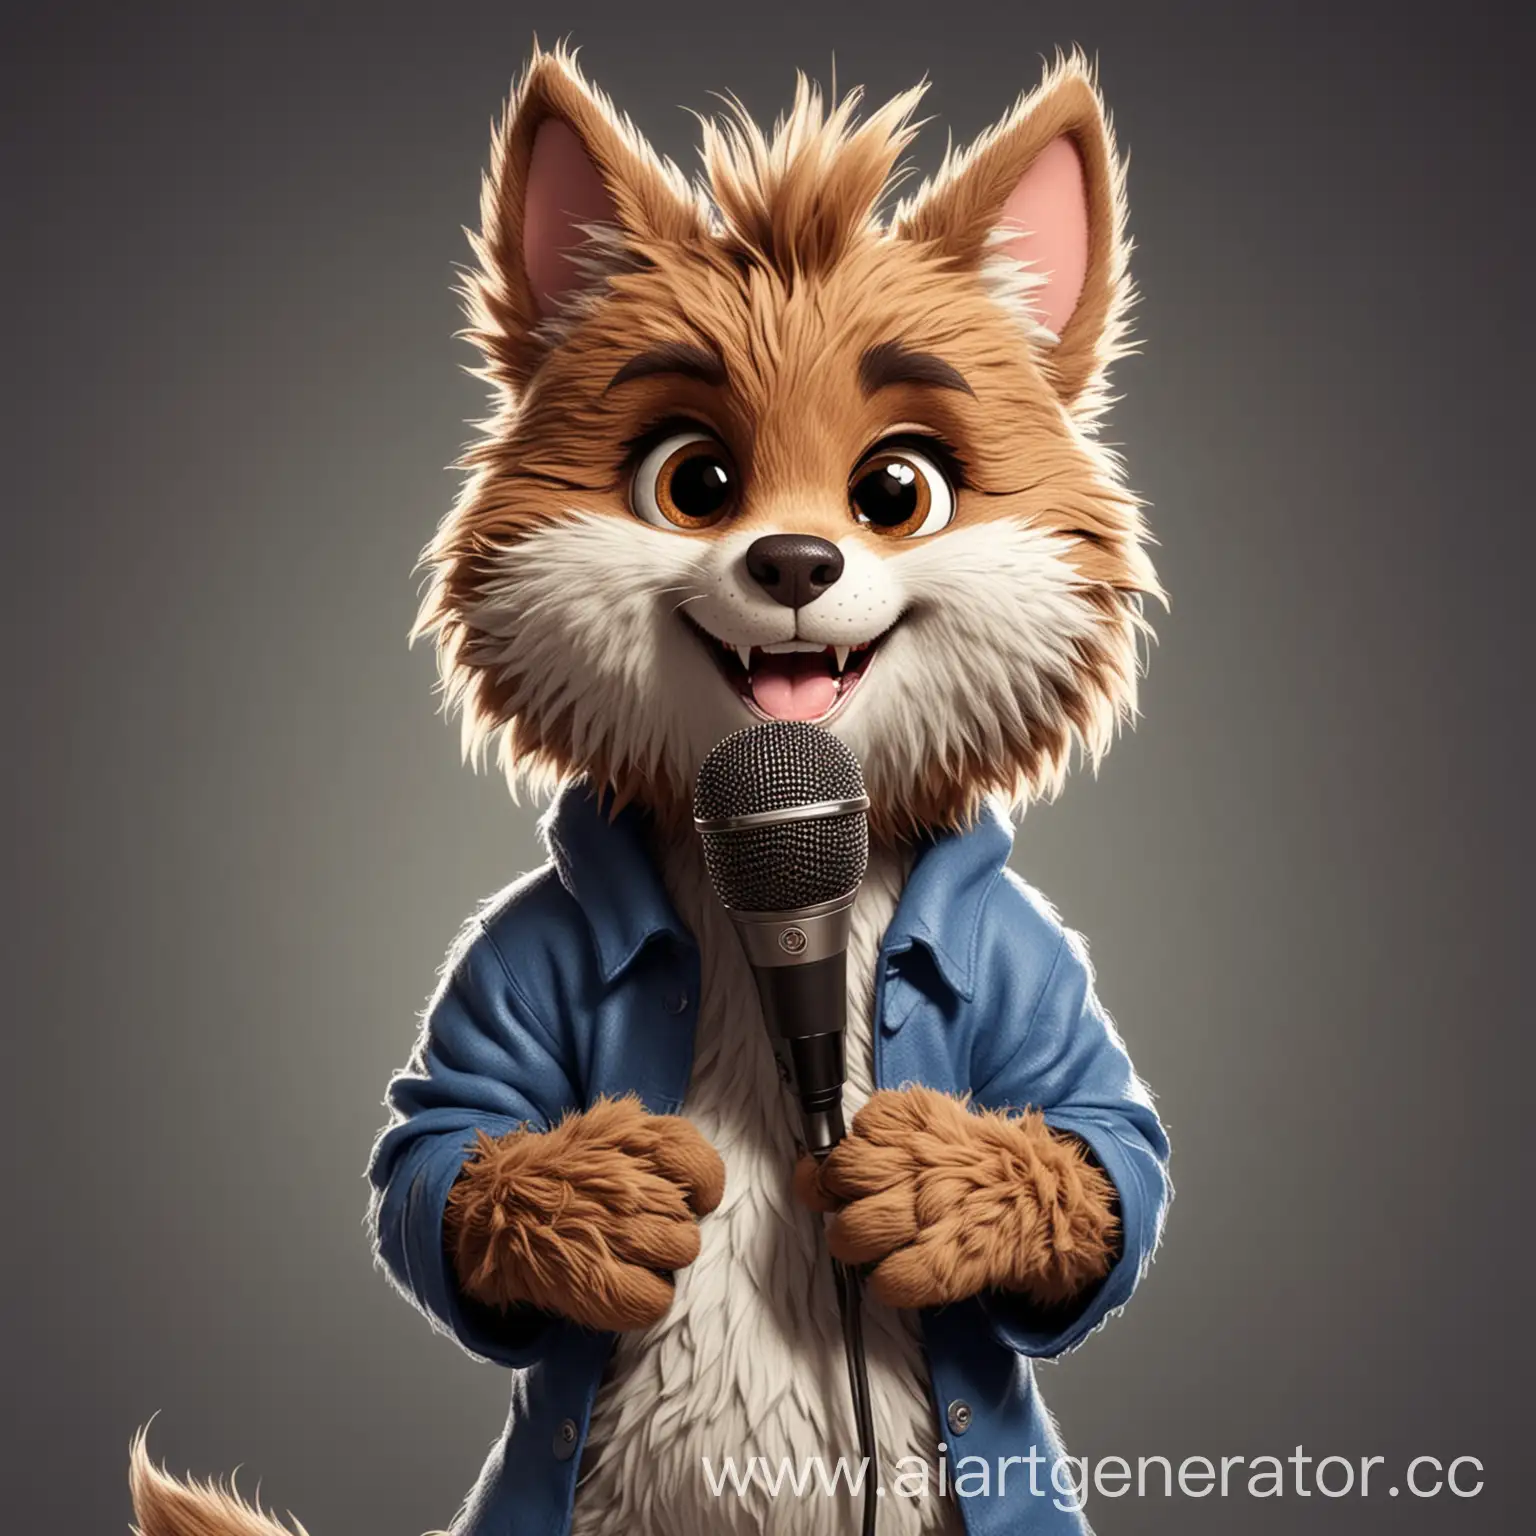 Animated-Furry-Cartoon-Character-with-Microphone-in-169-Aspect-Ratio